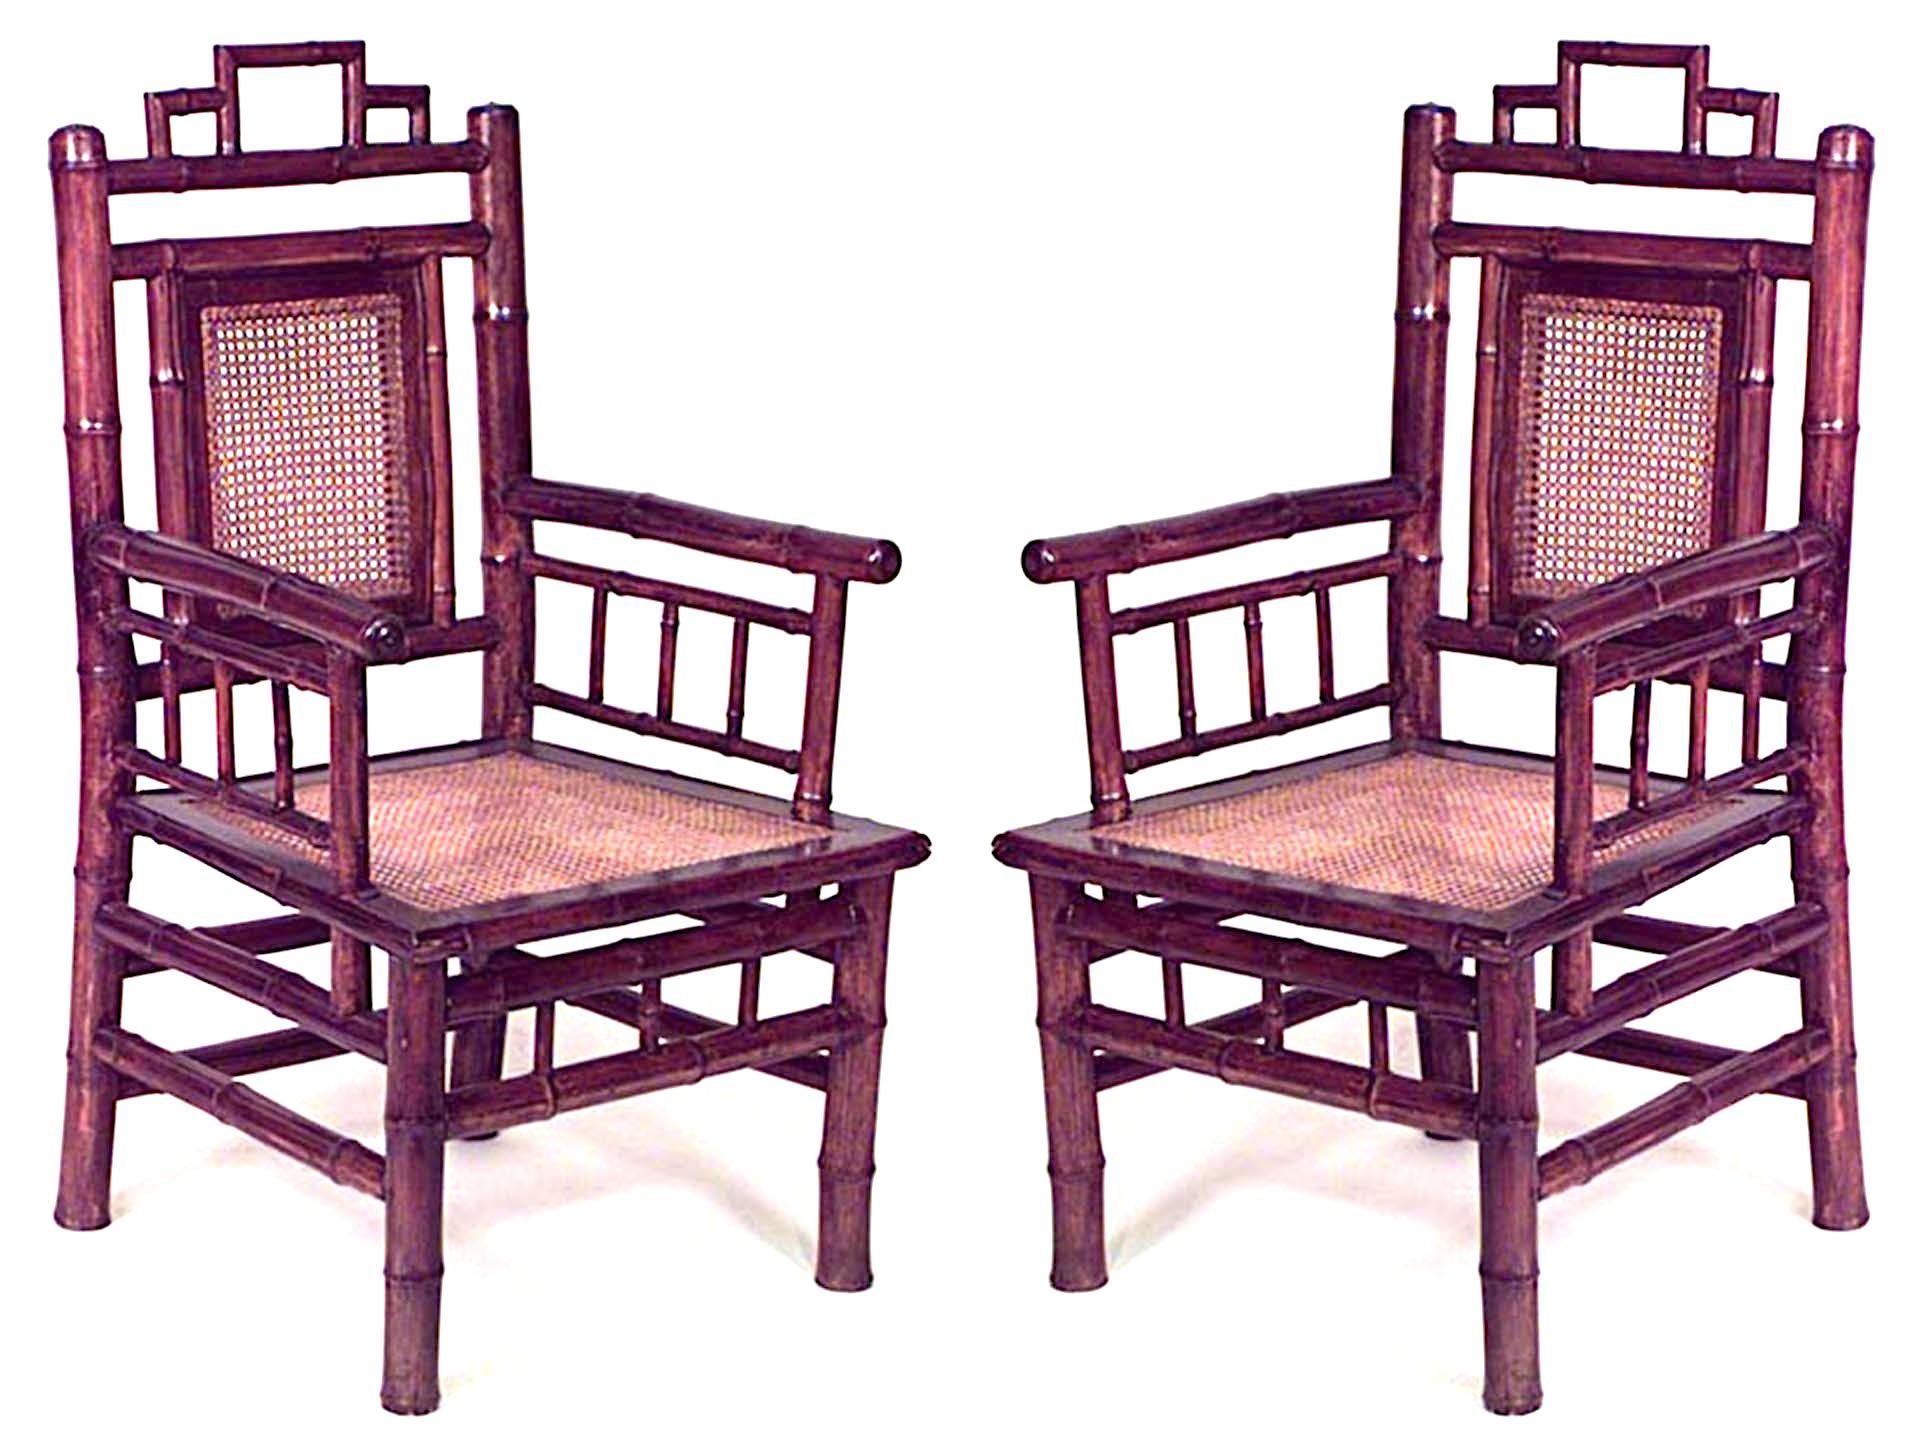 Pair of bamboo Armchairs with spindle design on arms and cane seat and back panel (19/20th Cent.)
